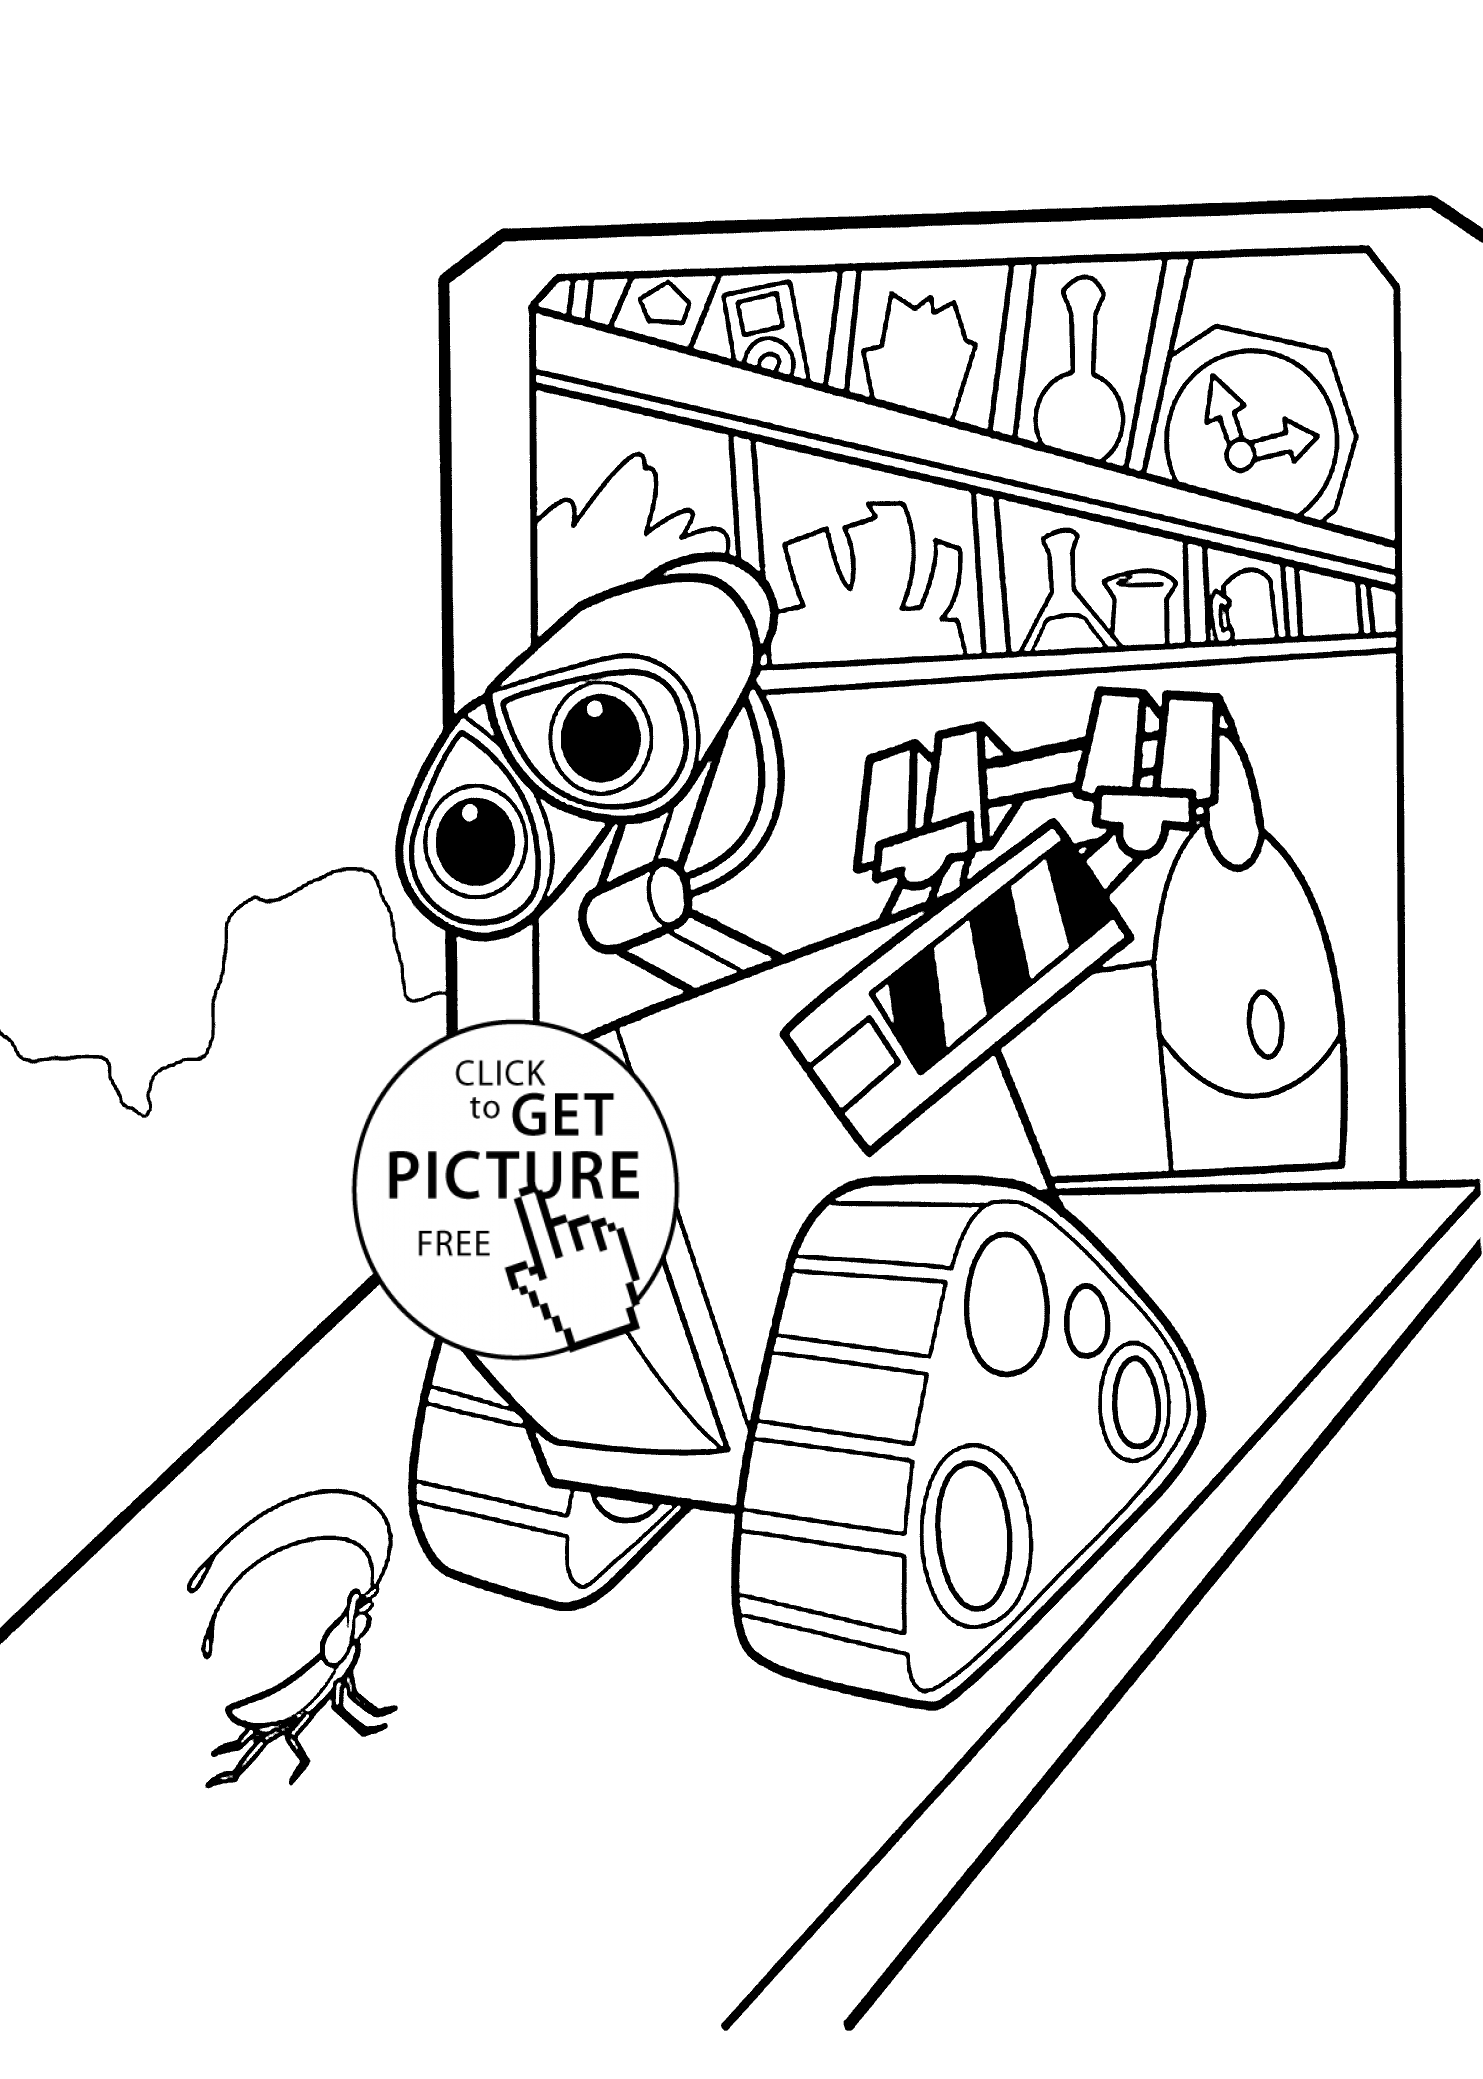 Wall-E home coloring pages for kids, printable free